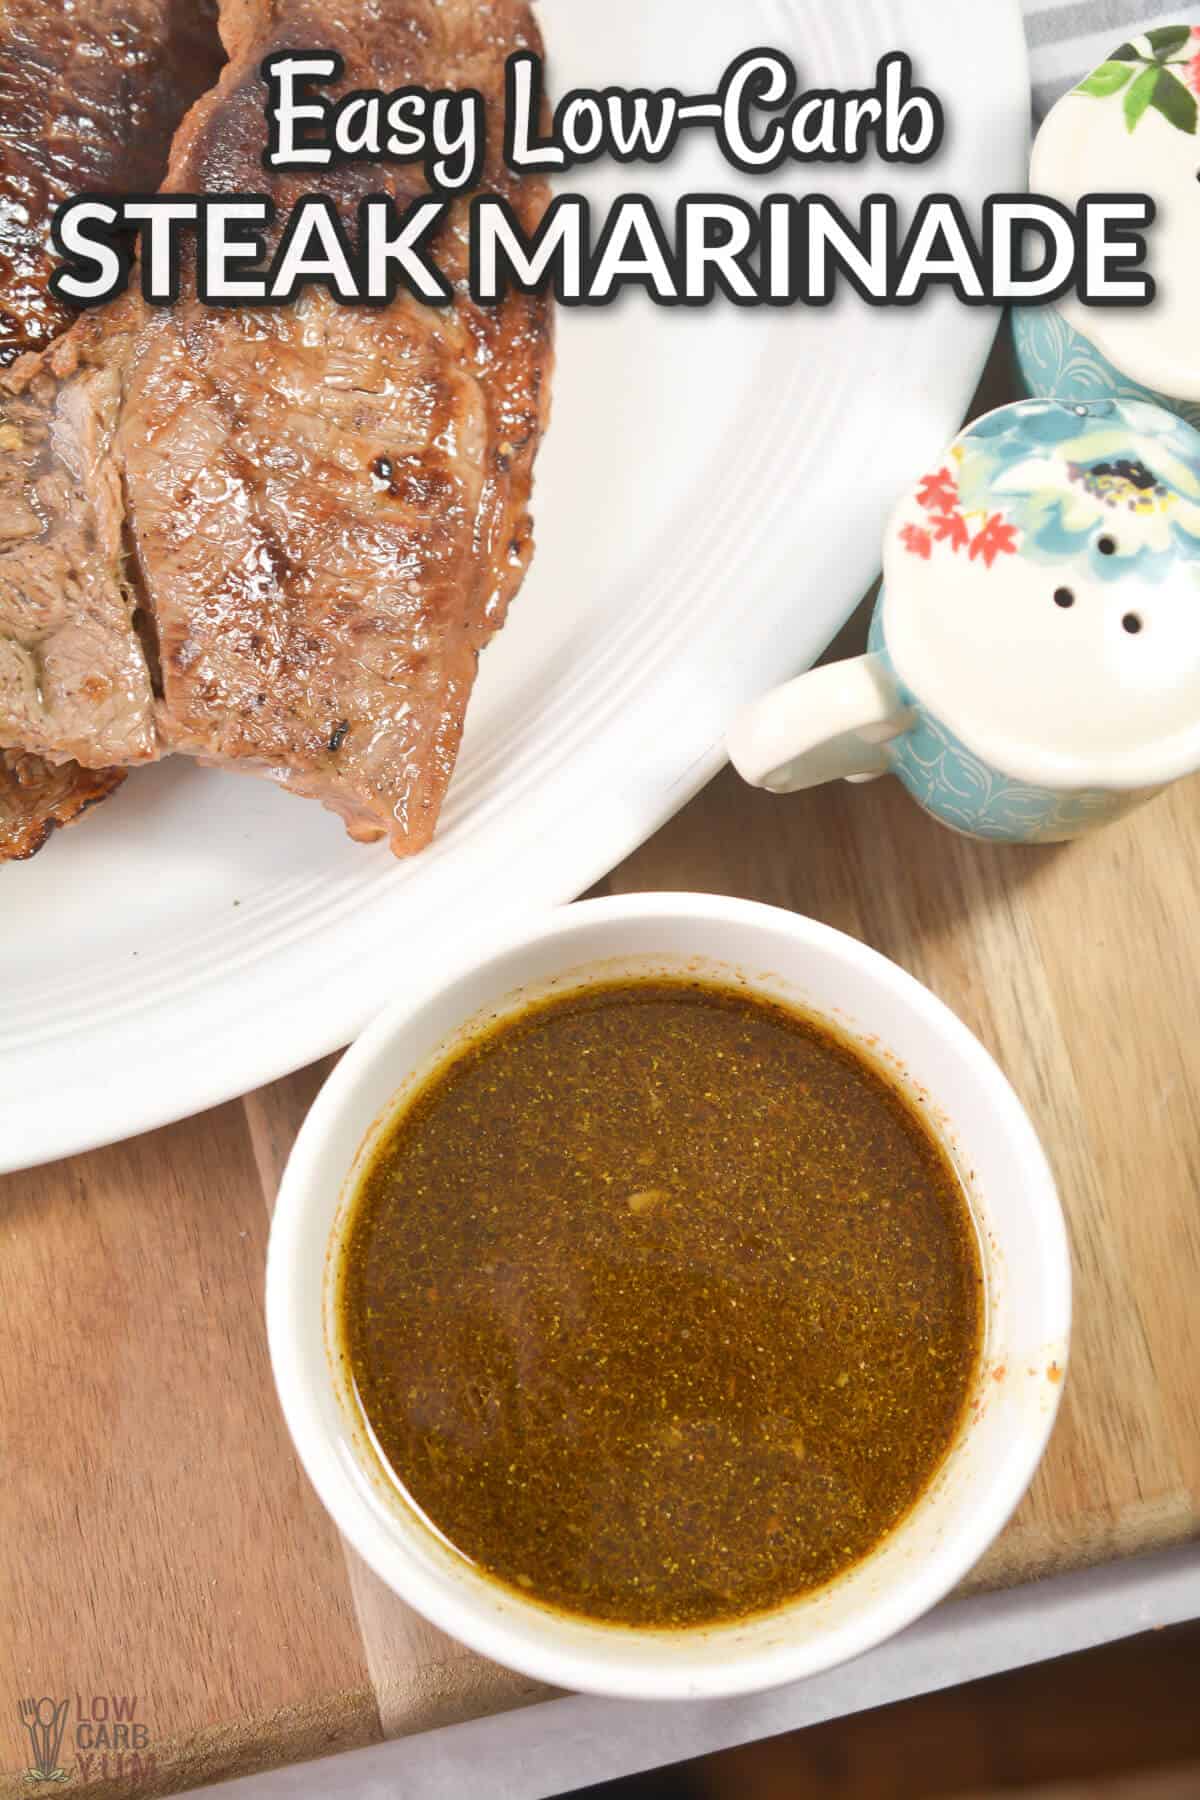 easy steak marinade with overlay text